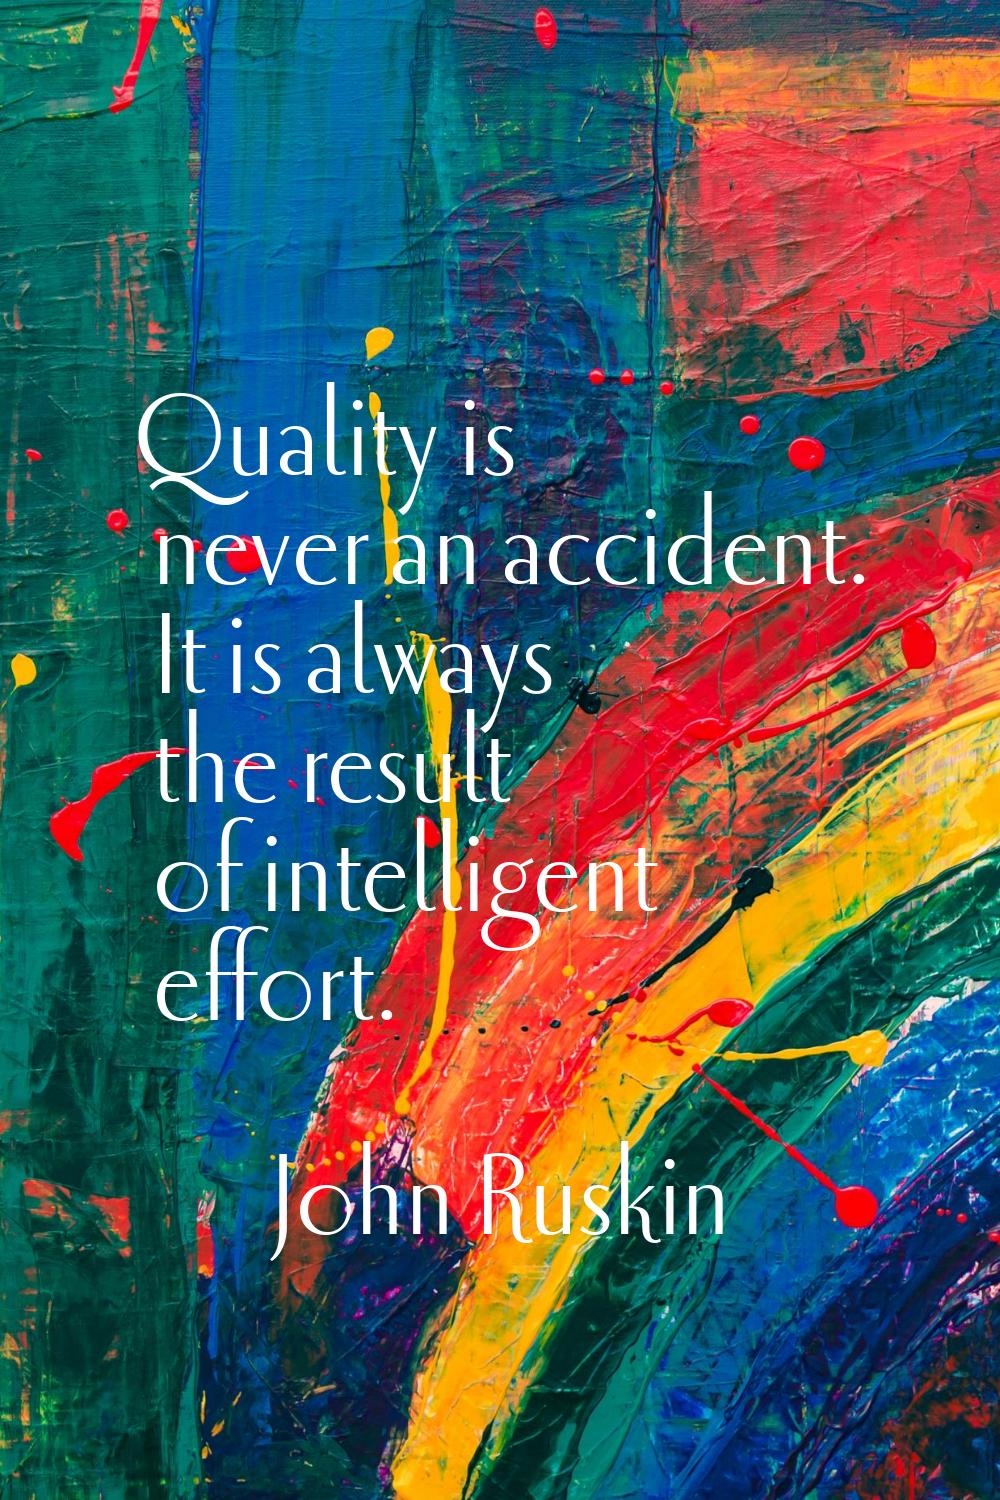 Quality is never an accident. It is always the result of intelligent effort.